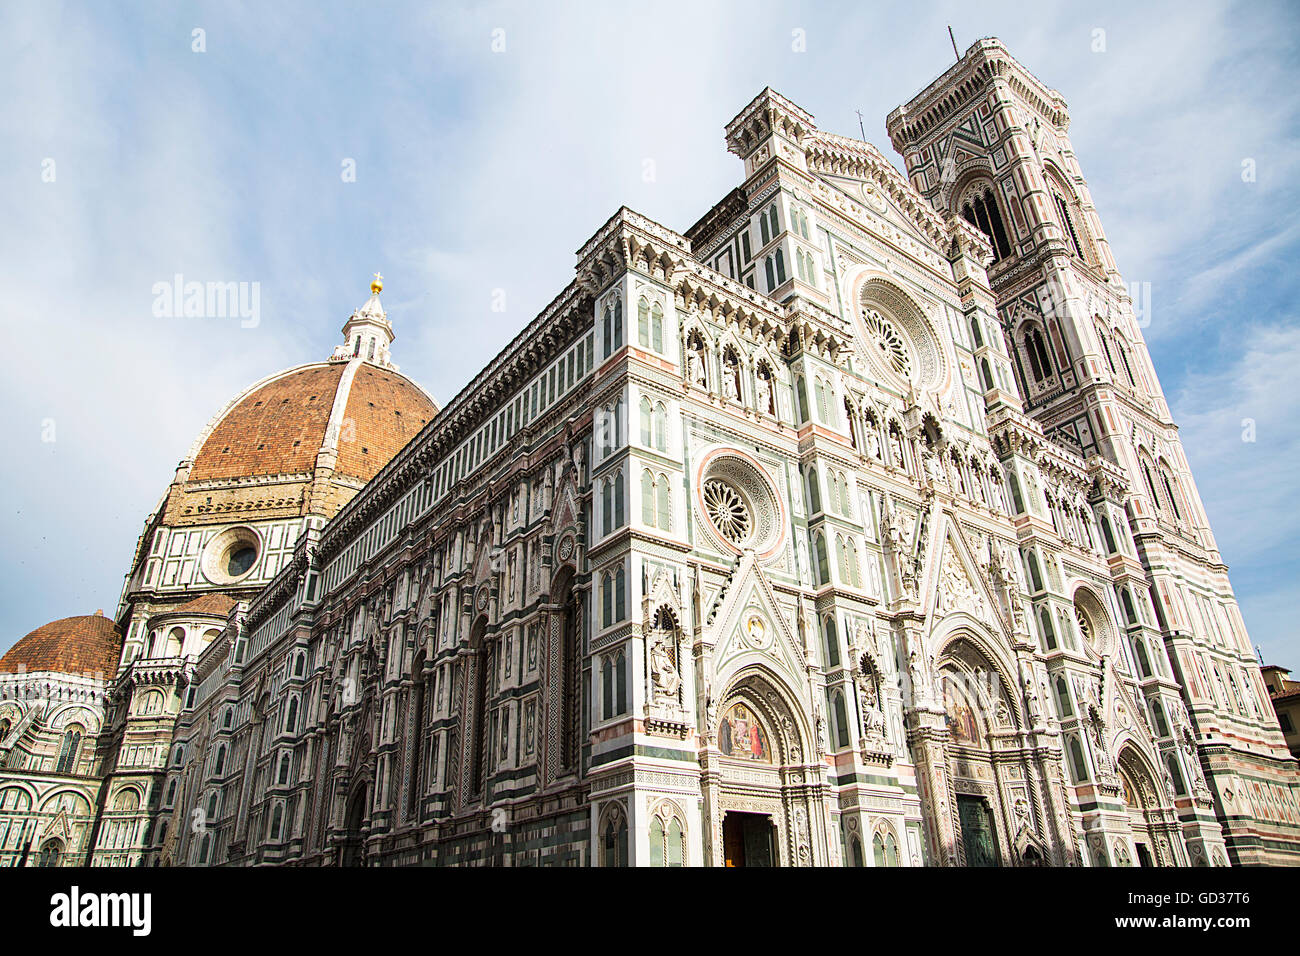 Detail of the Cattedrale di Santa Maria del Fiore in Florence, Italy Stock Photo